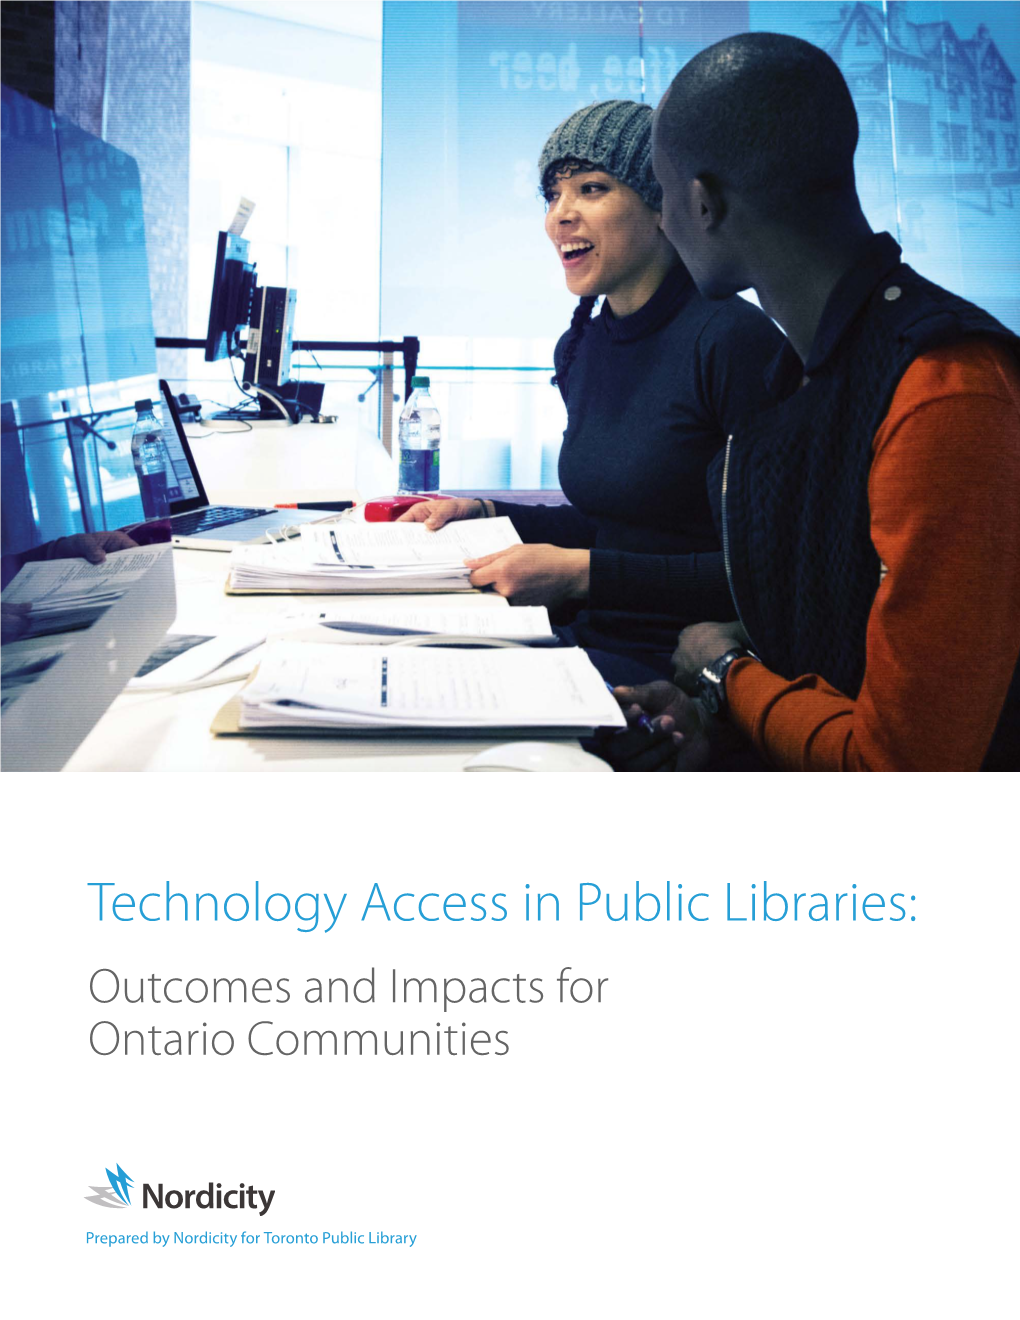 Technology Access in Public Libraries: Outcomes and Impacts for Ontario Communities